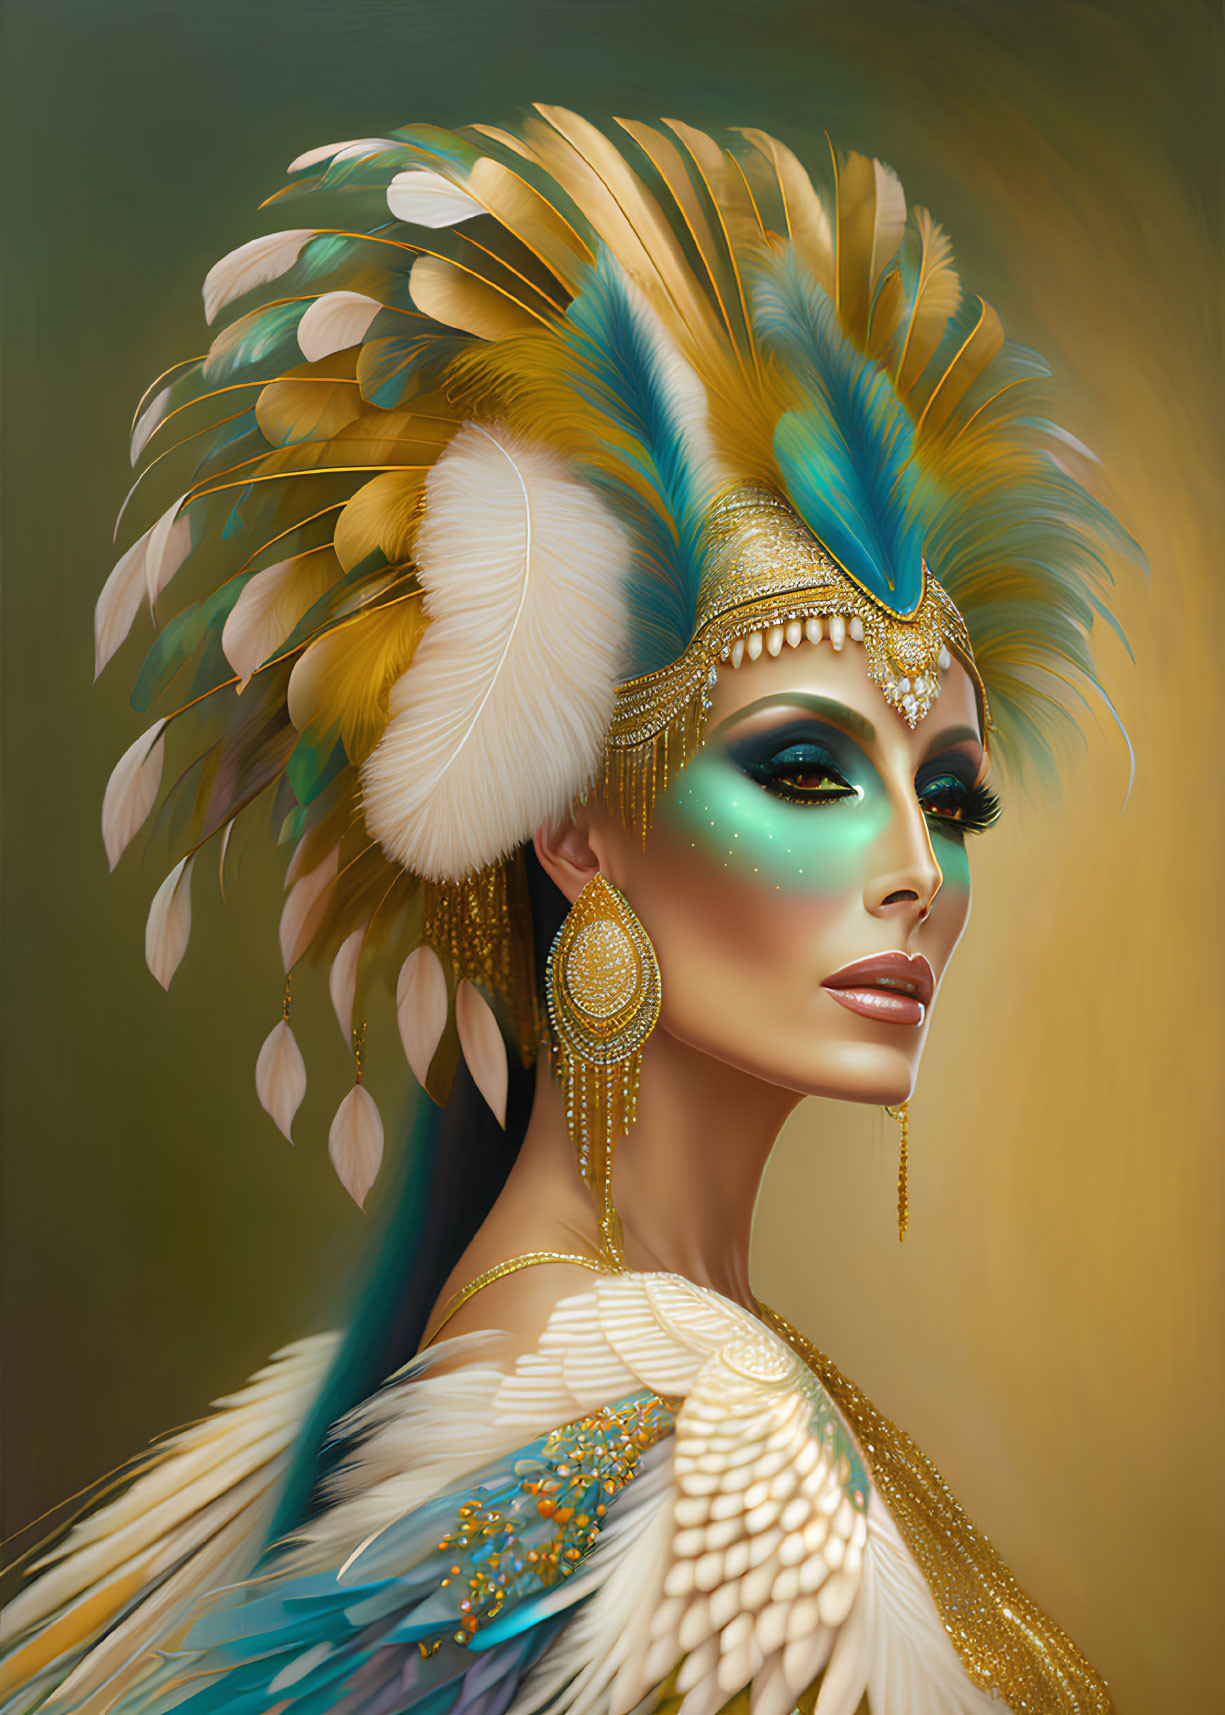 Luxurious feather headdress on woman with gold and teal accents